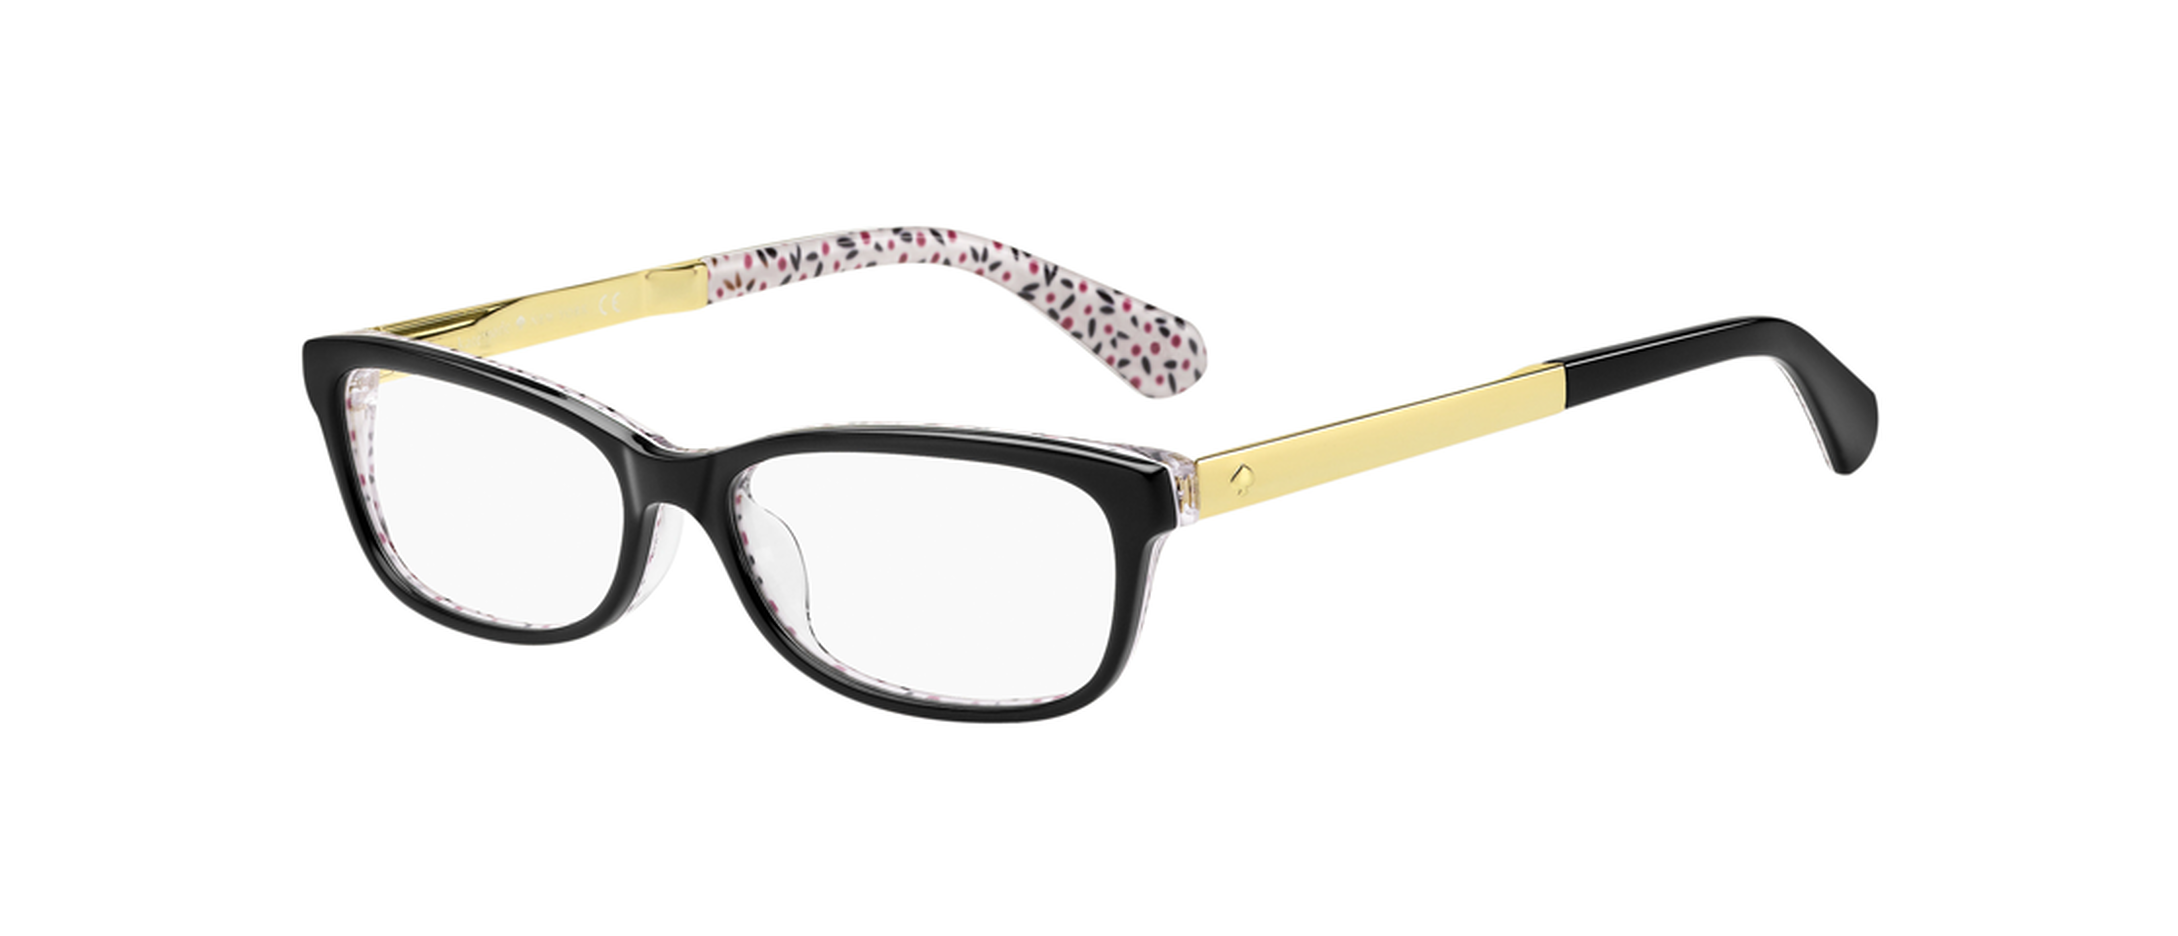 Kate Spade JESSALYN Glasses | Free Shipping and Returns | Eyeconic